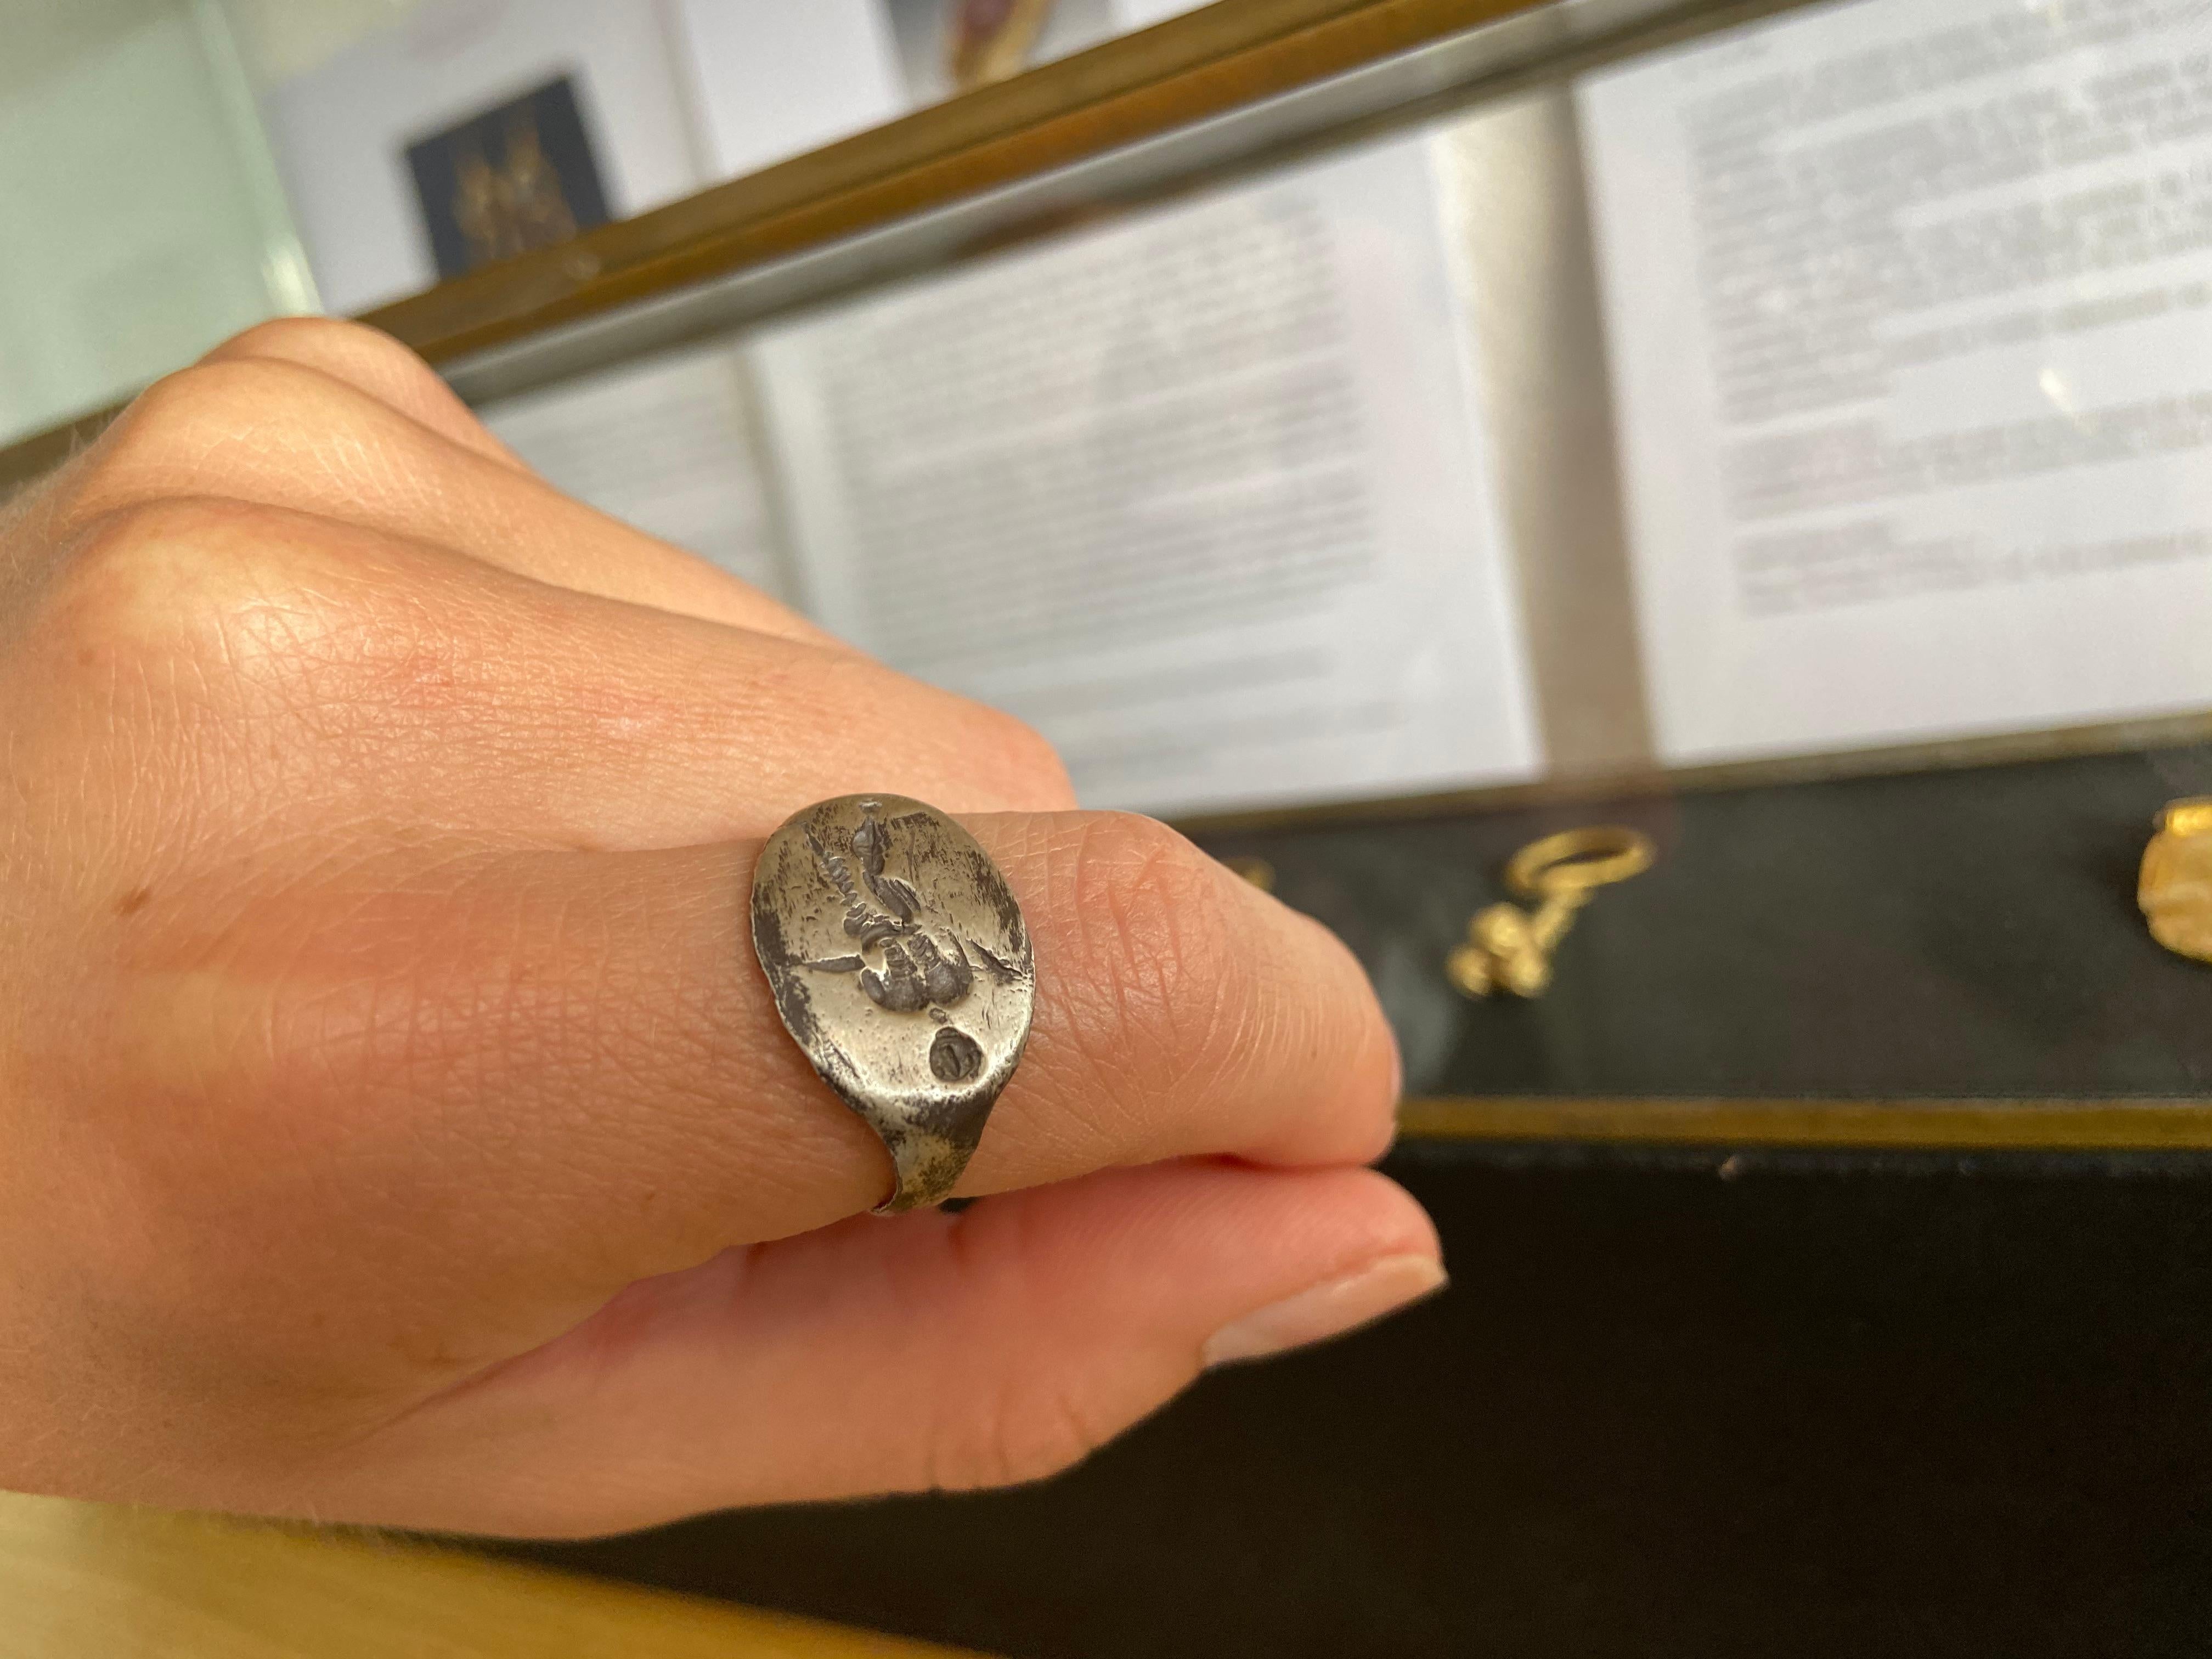 A silver ring with D-section hoop, flat discoid bezel with a nude male figure with stylized facial features, standing behind branches. 3.67 grams, measures: 22.62mm overall, 20.68mm internal diameter (approximate size British R, USA 8 1/2, Europe 18